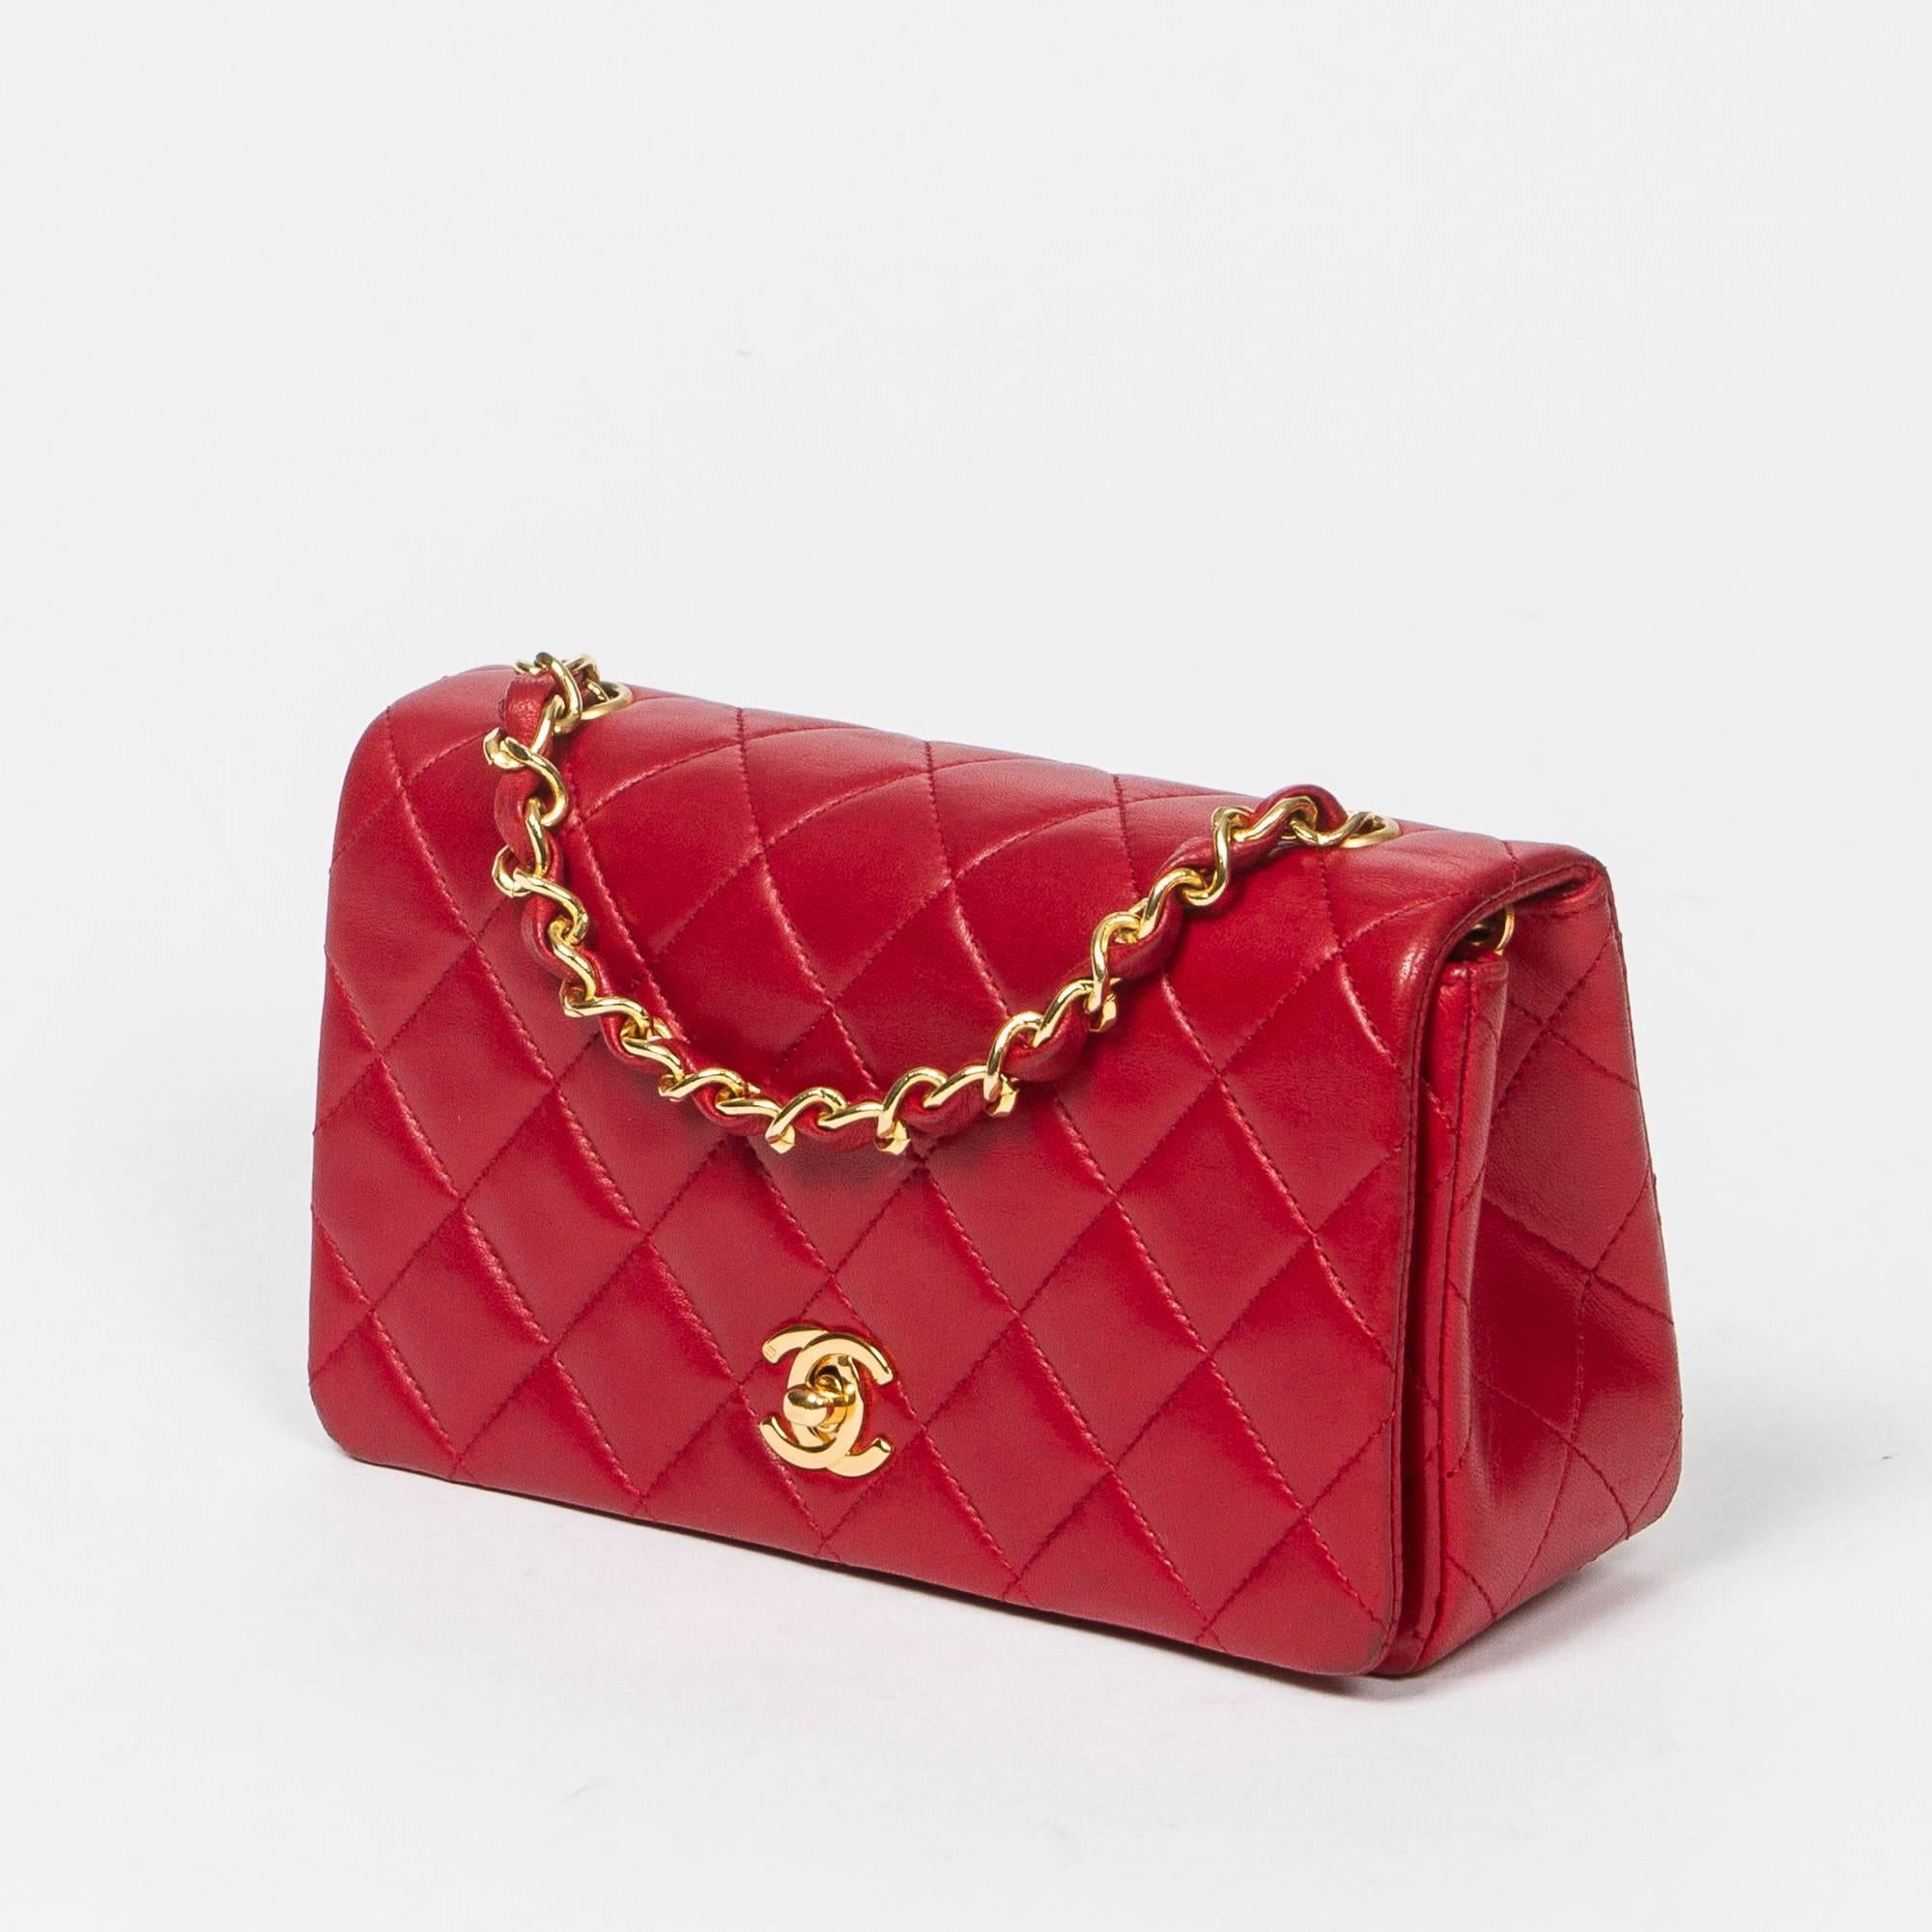 Mini Full Flap in red quilted leather with gold tone chain strap interlaced with black leather. Turnlock 